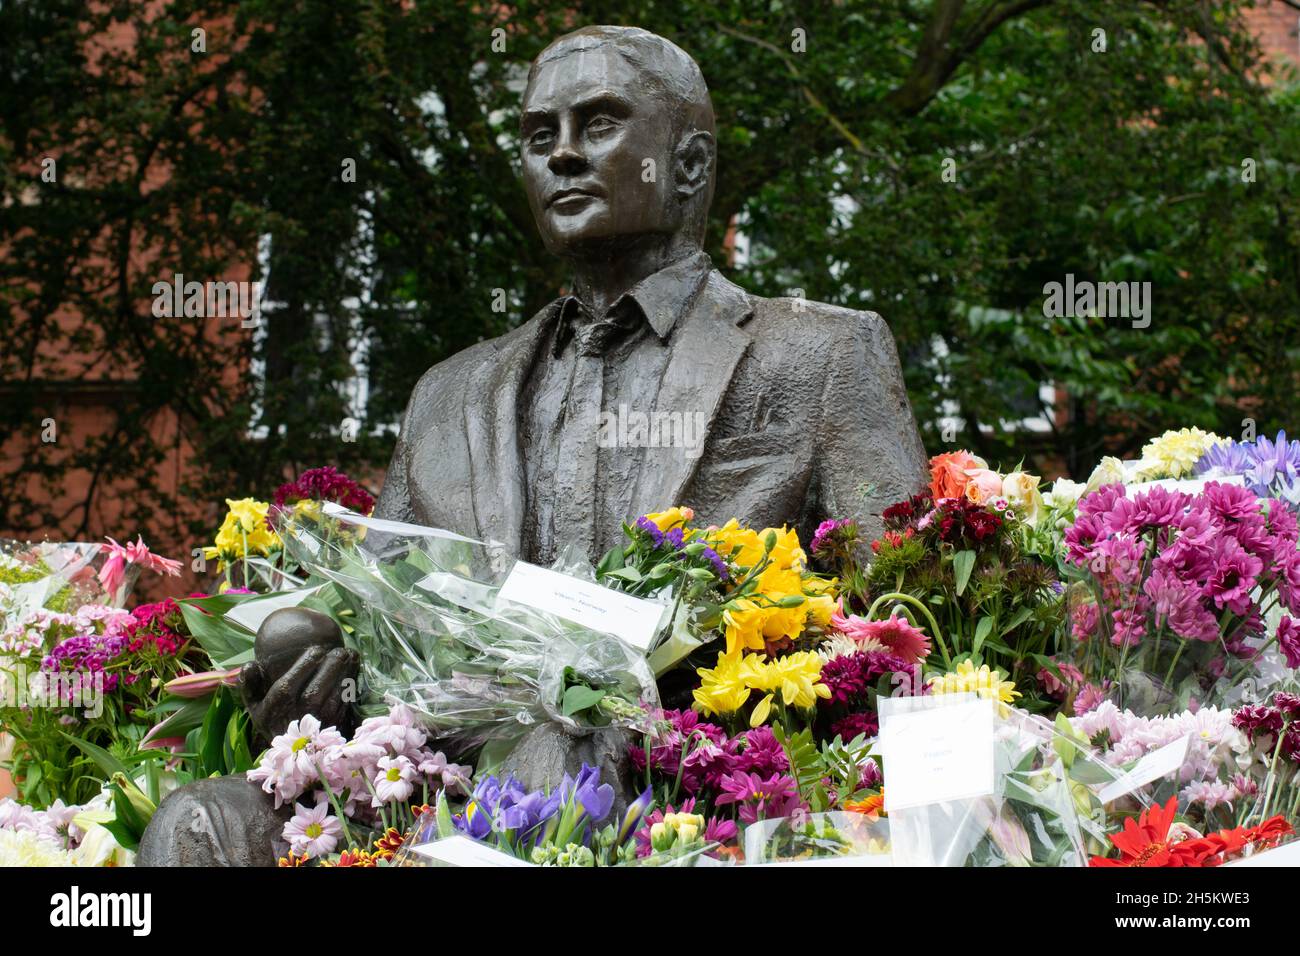 Alan Turing statue surrounded by flowers on his birthday. Sackville Gardens, Manchester,UK Stock Photo